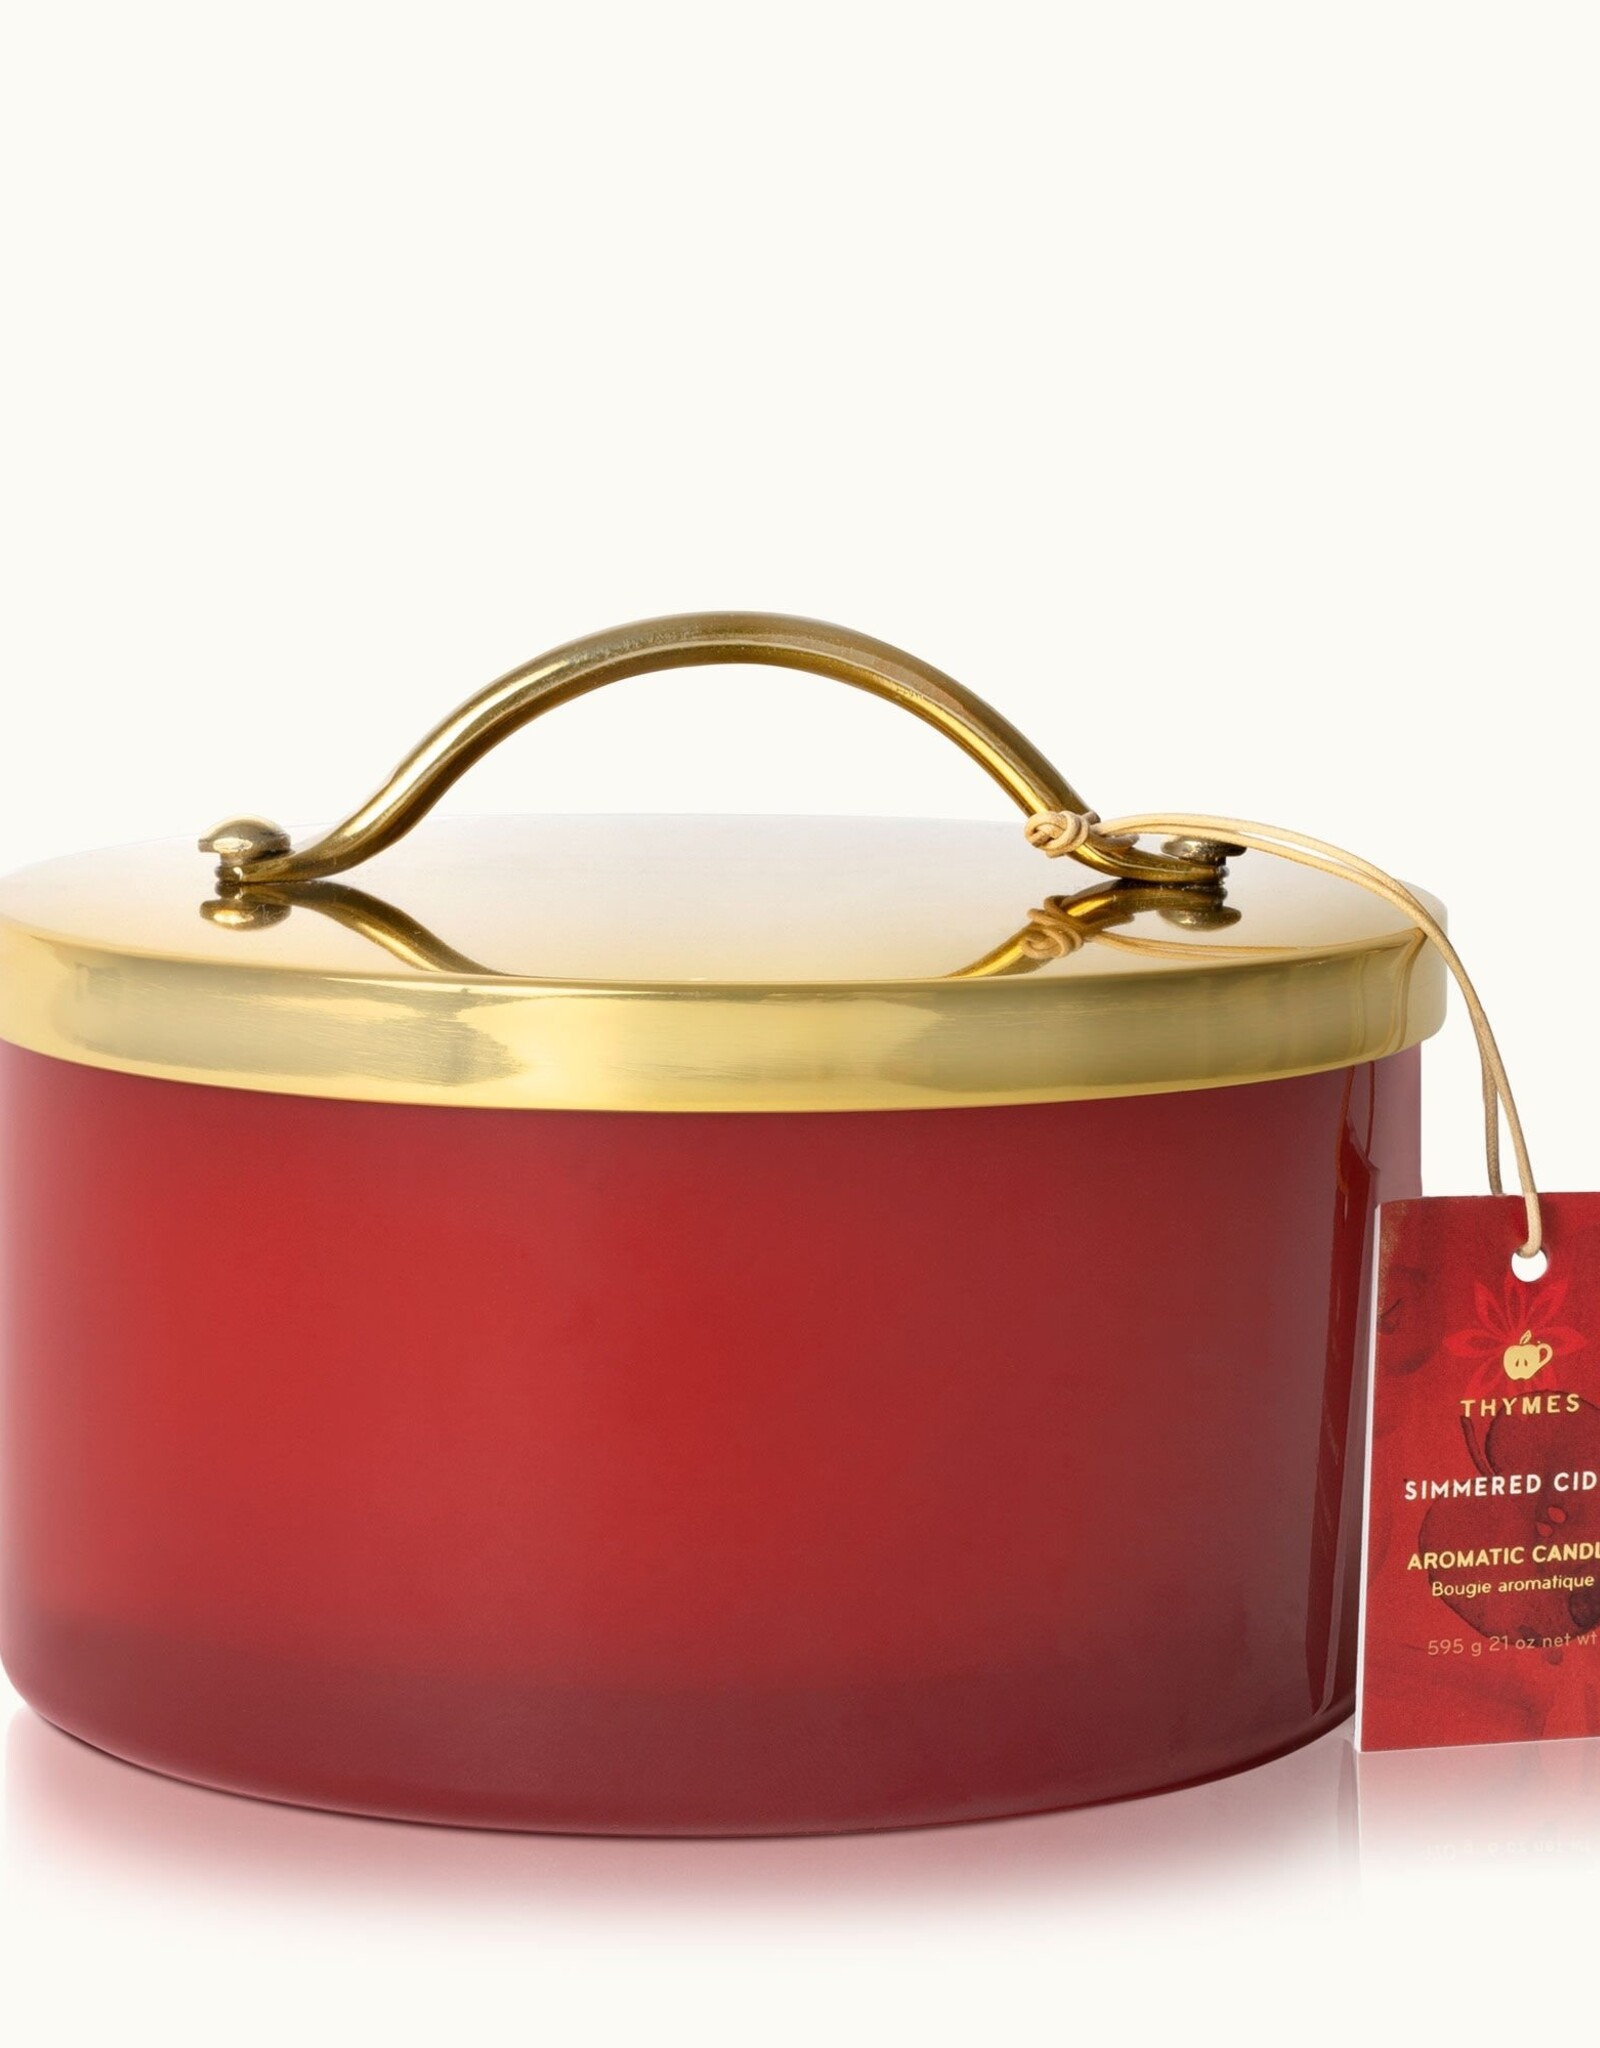 Simmered Cider Harvest Red 4-Wick Candle